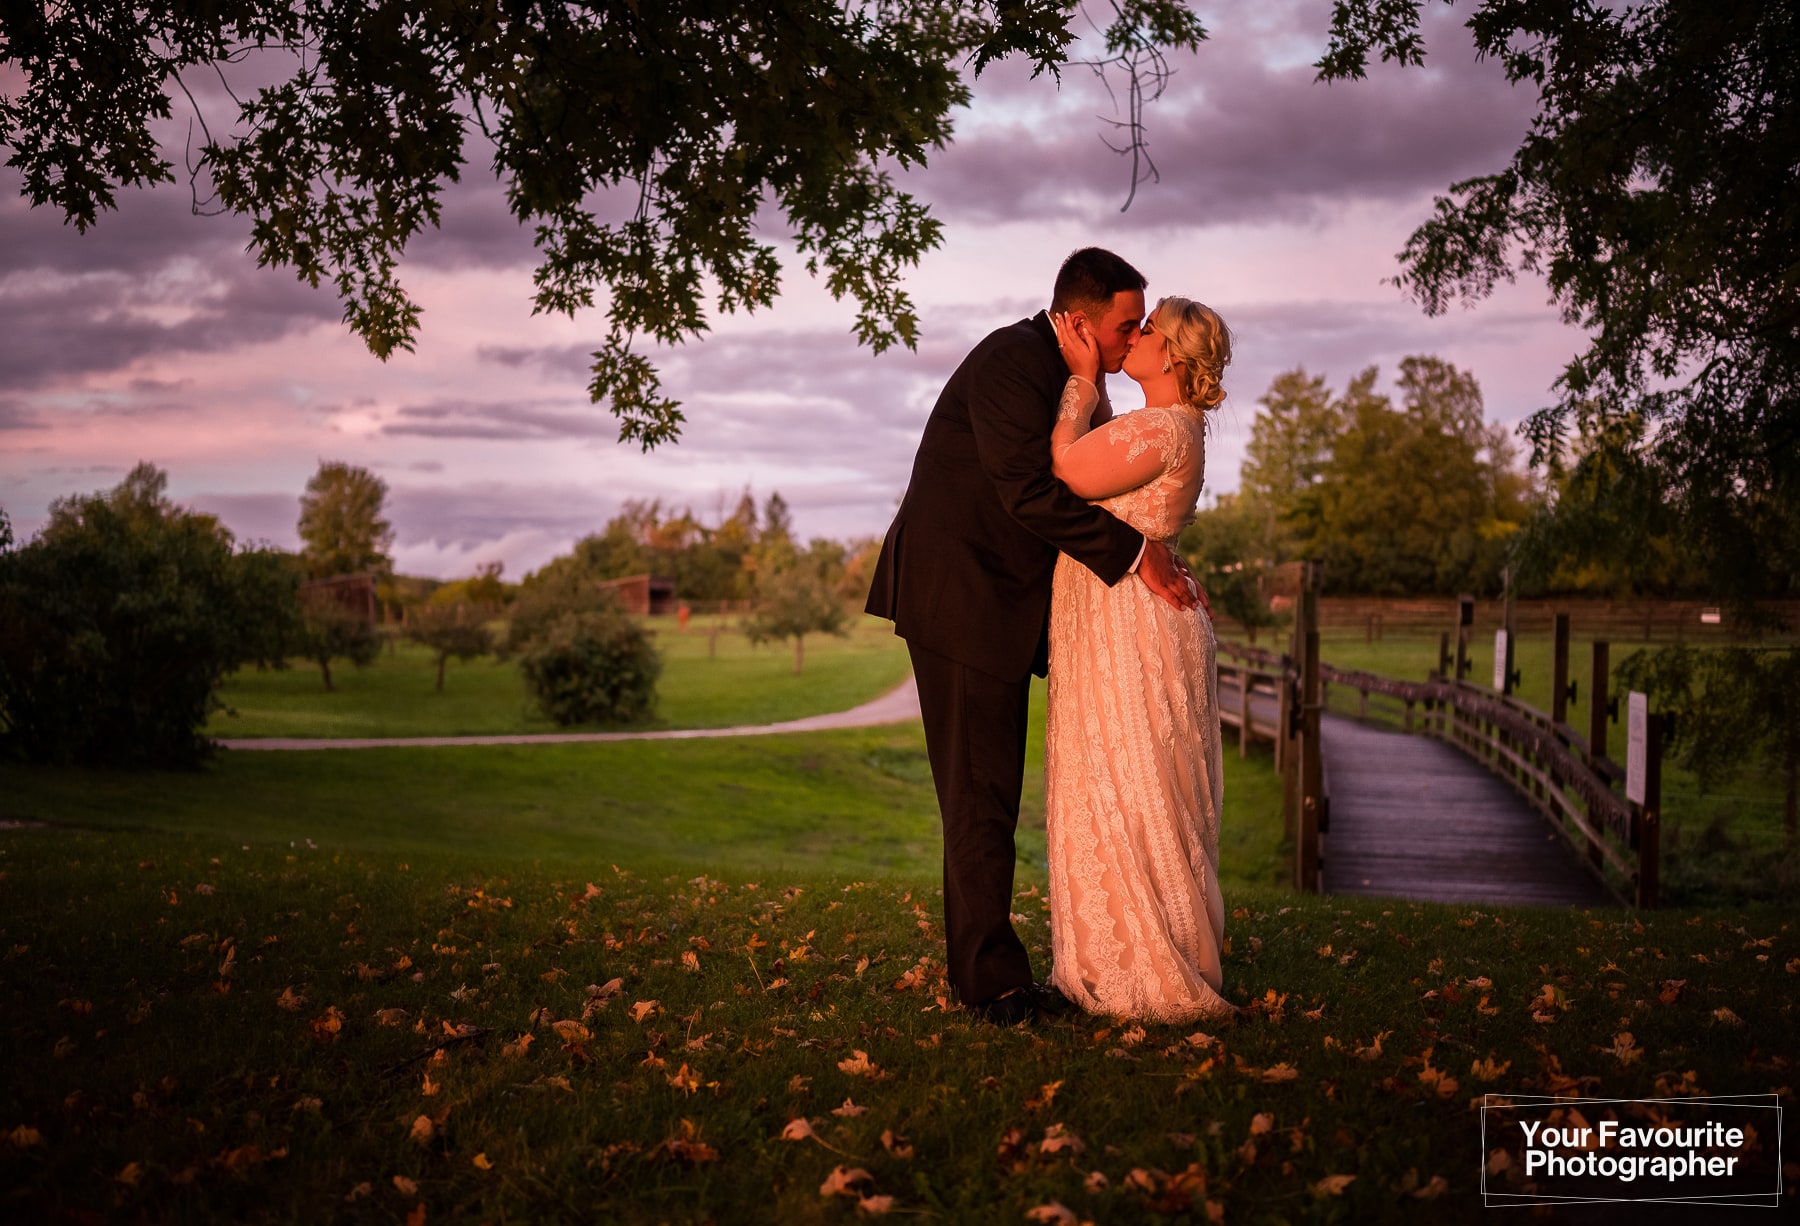 Sunset golden hour photo of bride and groom at farm